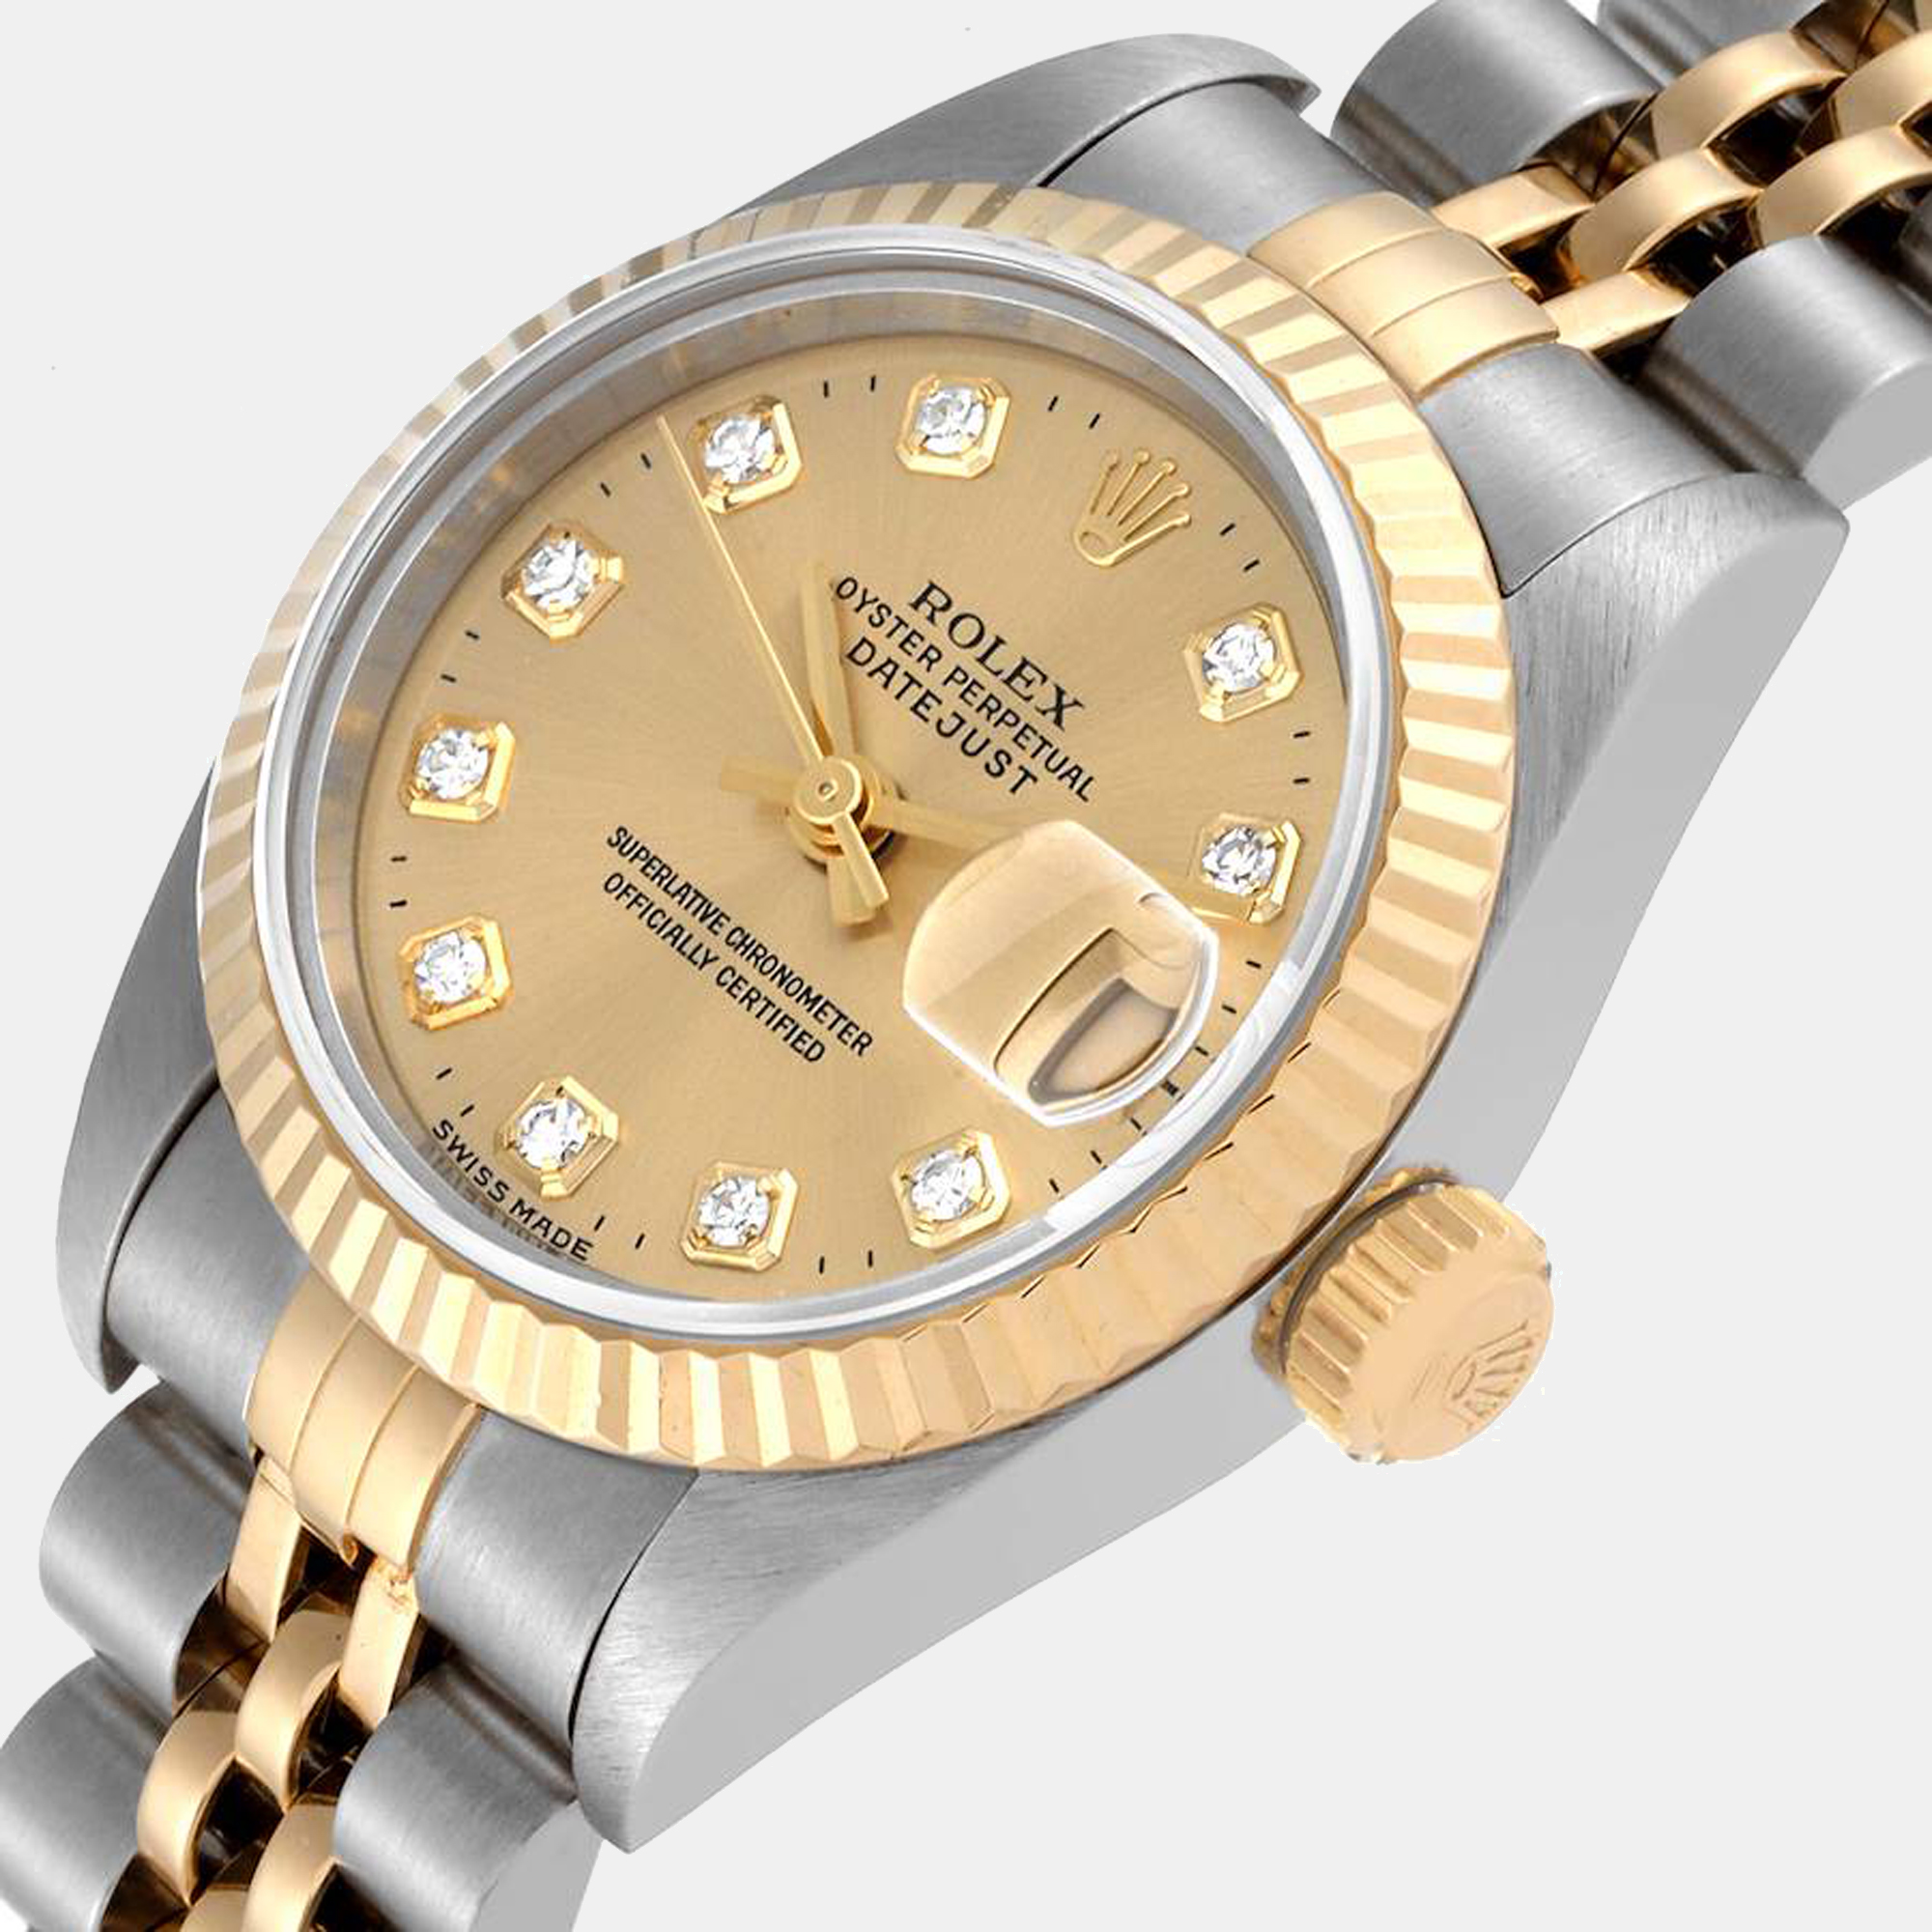 

Rolex Champagne Diamonds 18K Yellow Gold And Stainless Steel Datejust 69173 Women's Wristwatch 26 mm